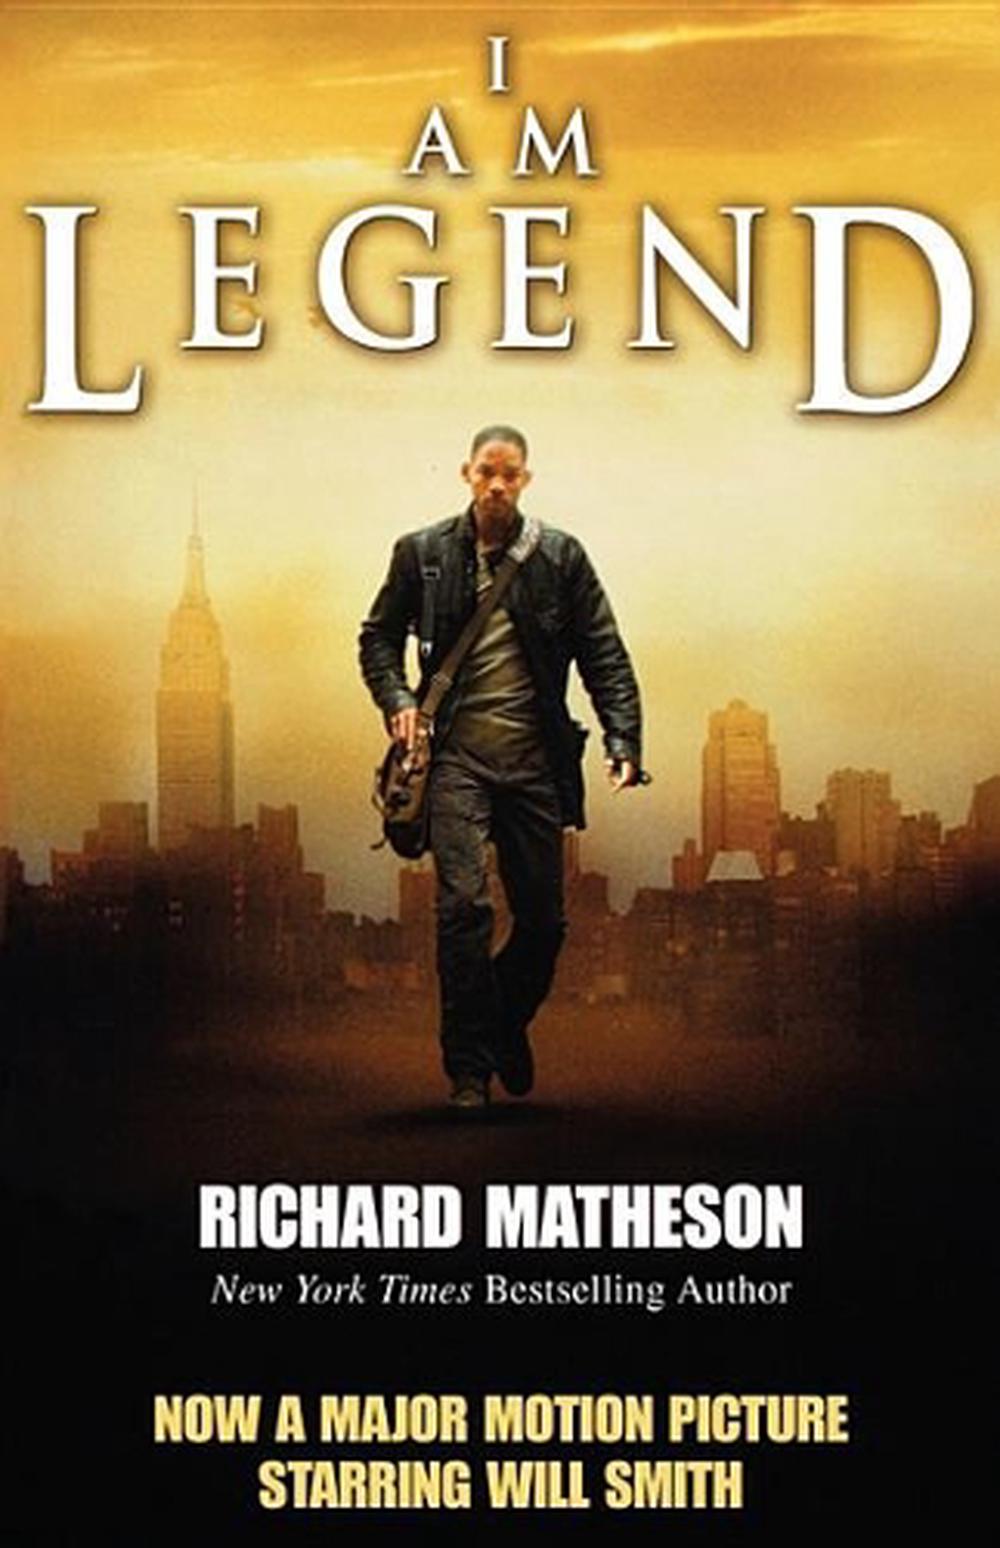 whole poibt of richard mathesons i am legend is that human becomes monster